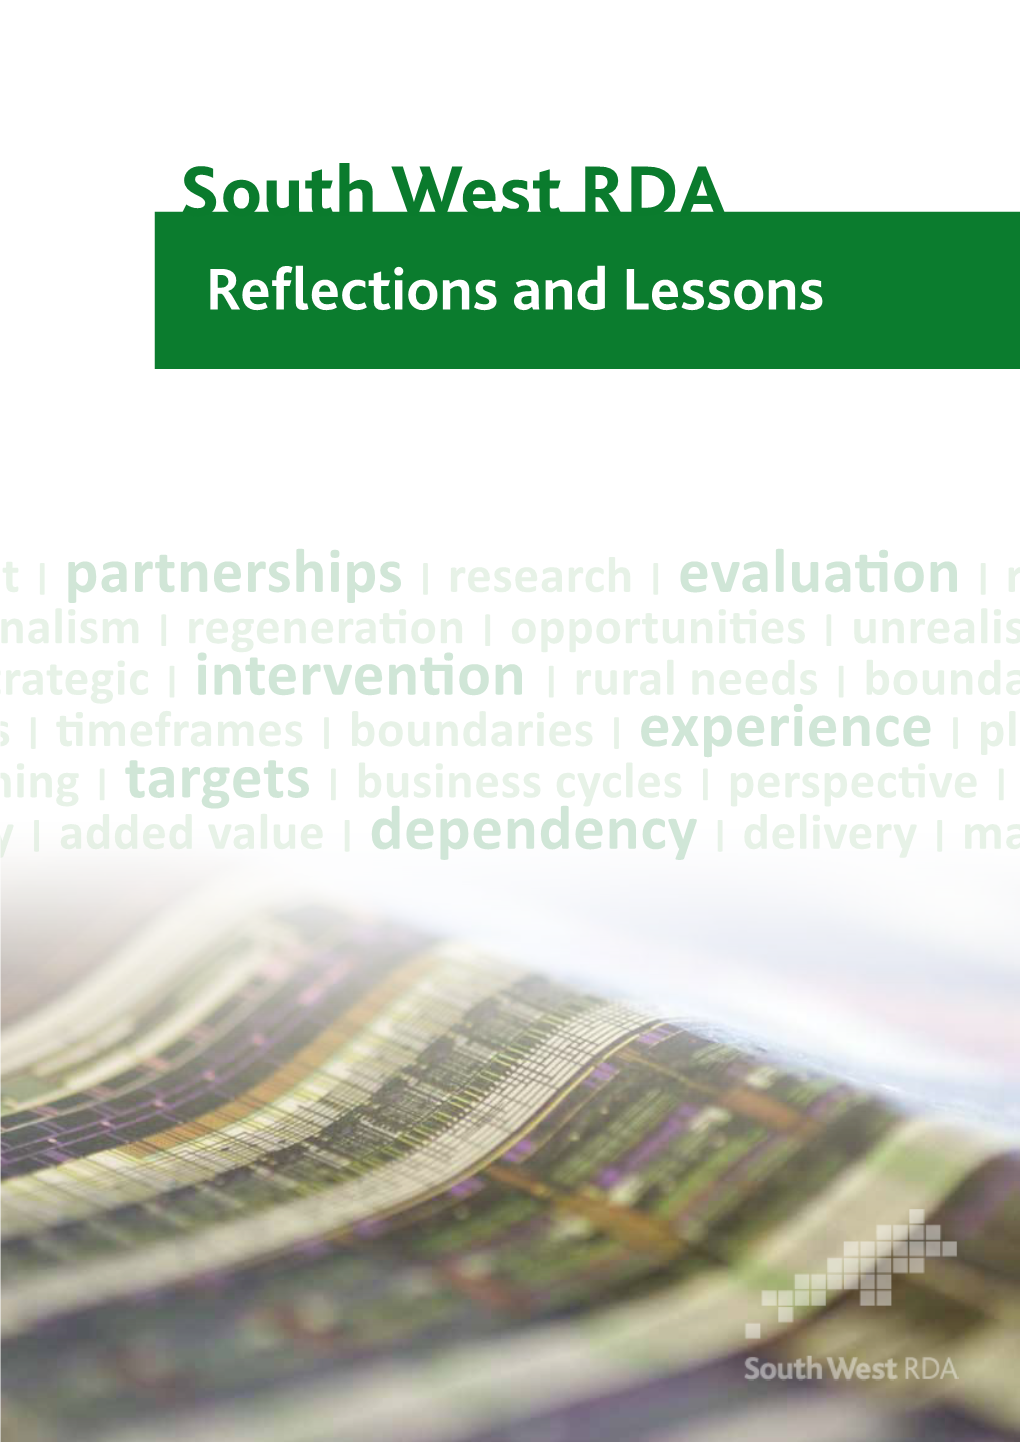 South West RDA Reflections and Lessons